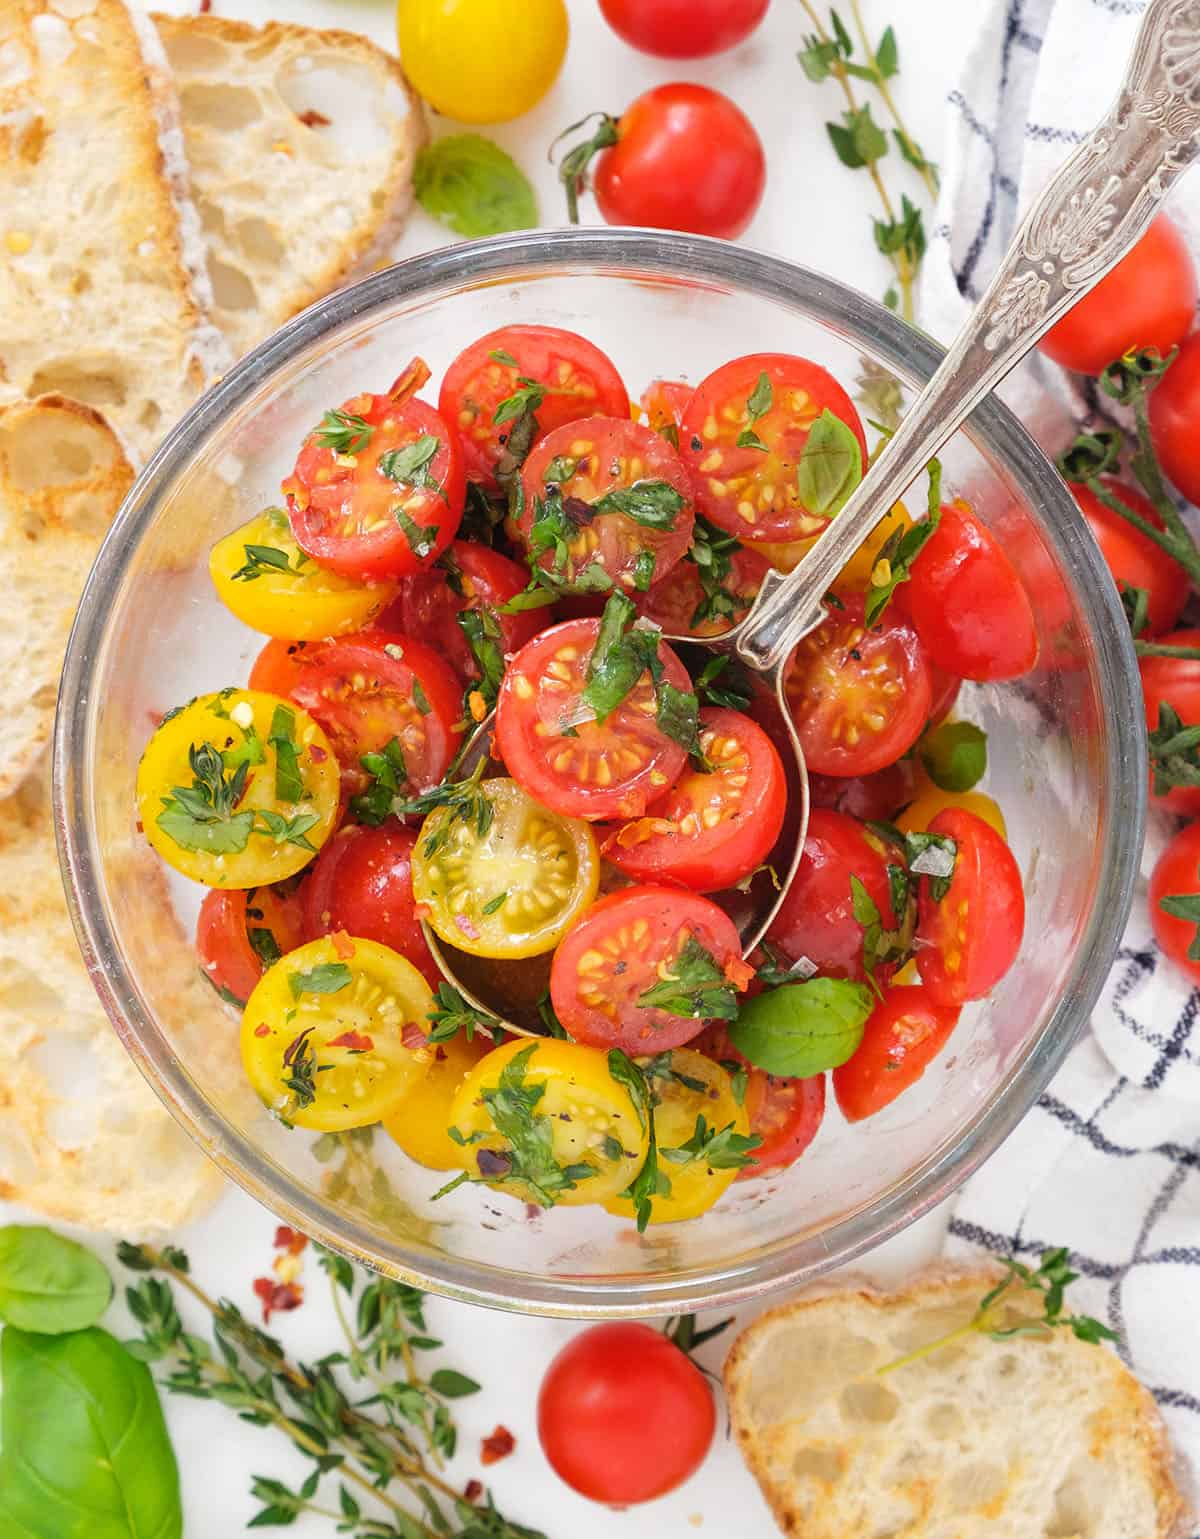 Top view of a glass bowl full of marinated cherry tomatoes served with crostini.